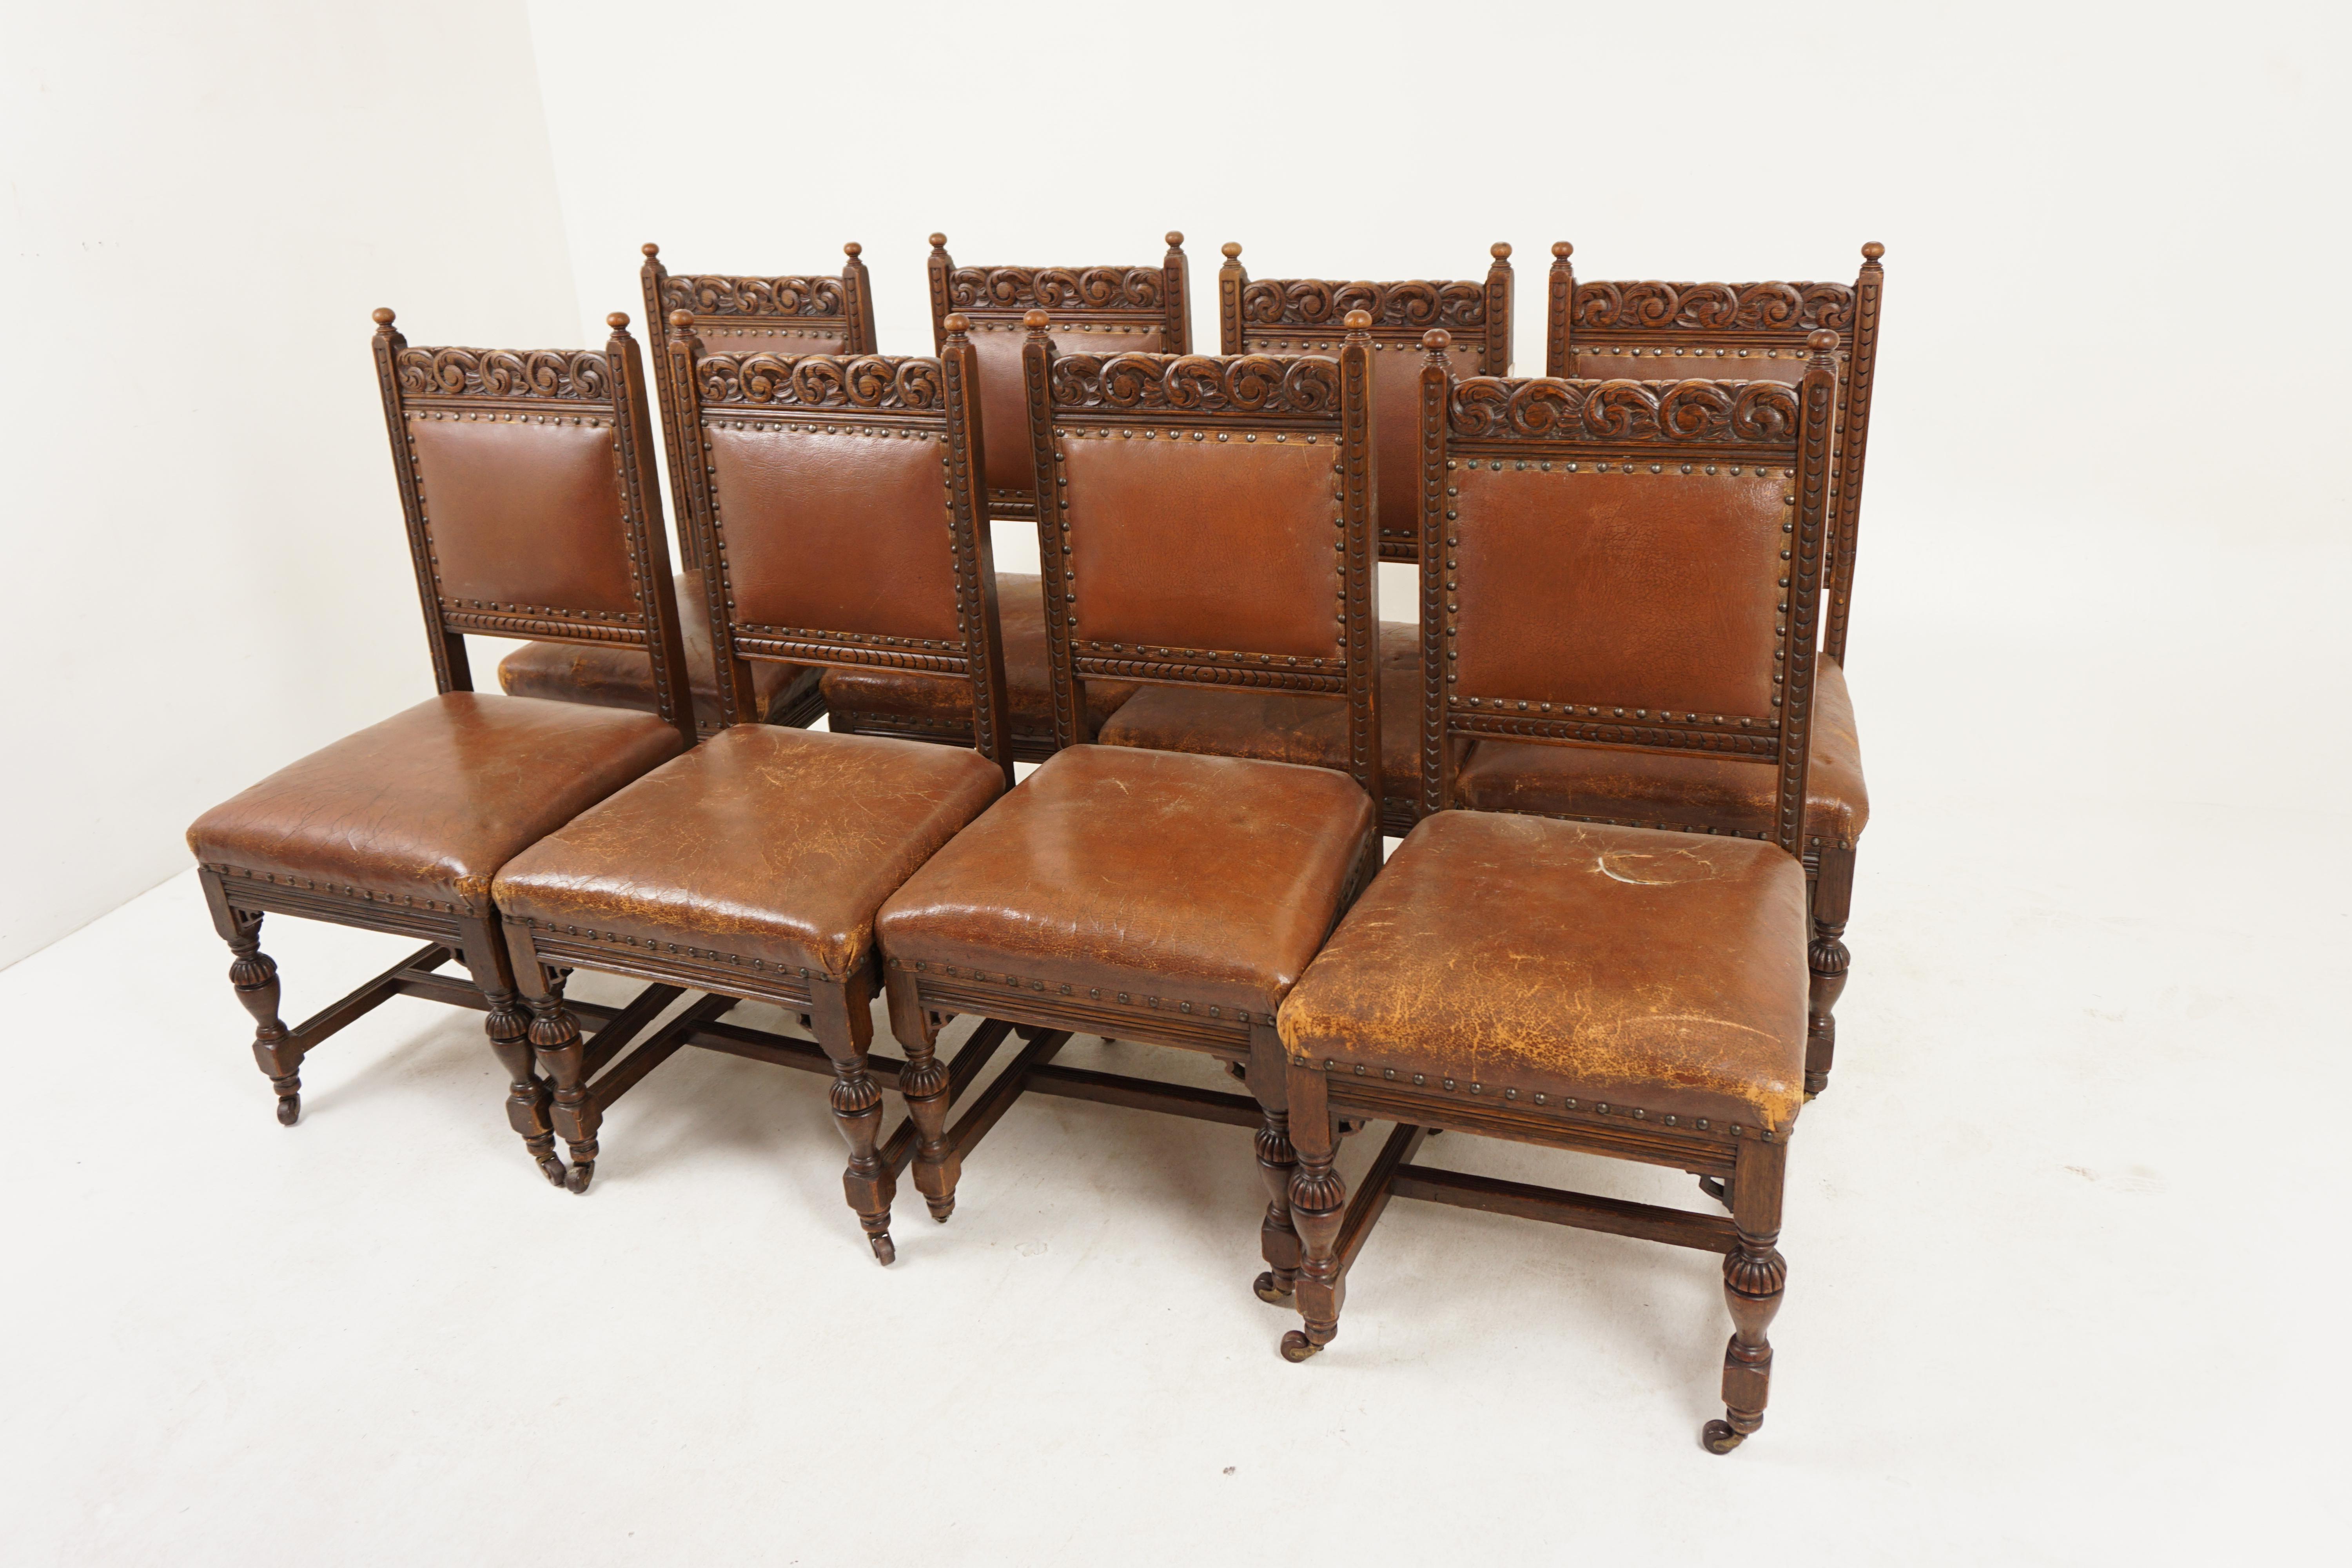 8 Heavily Carved Victorian Oak Upholstered Dining Chairs, Scotland 1880, H956

Scotland 1890
Solid Oak
Original finish
Carved top rail with supports on the ends
Padded backrest with upholstered leather seat
All standing on two turned front legs and